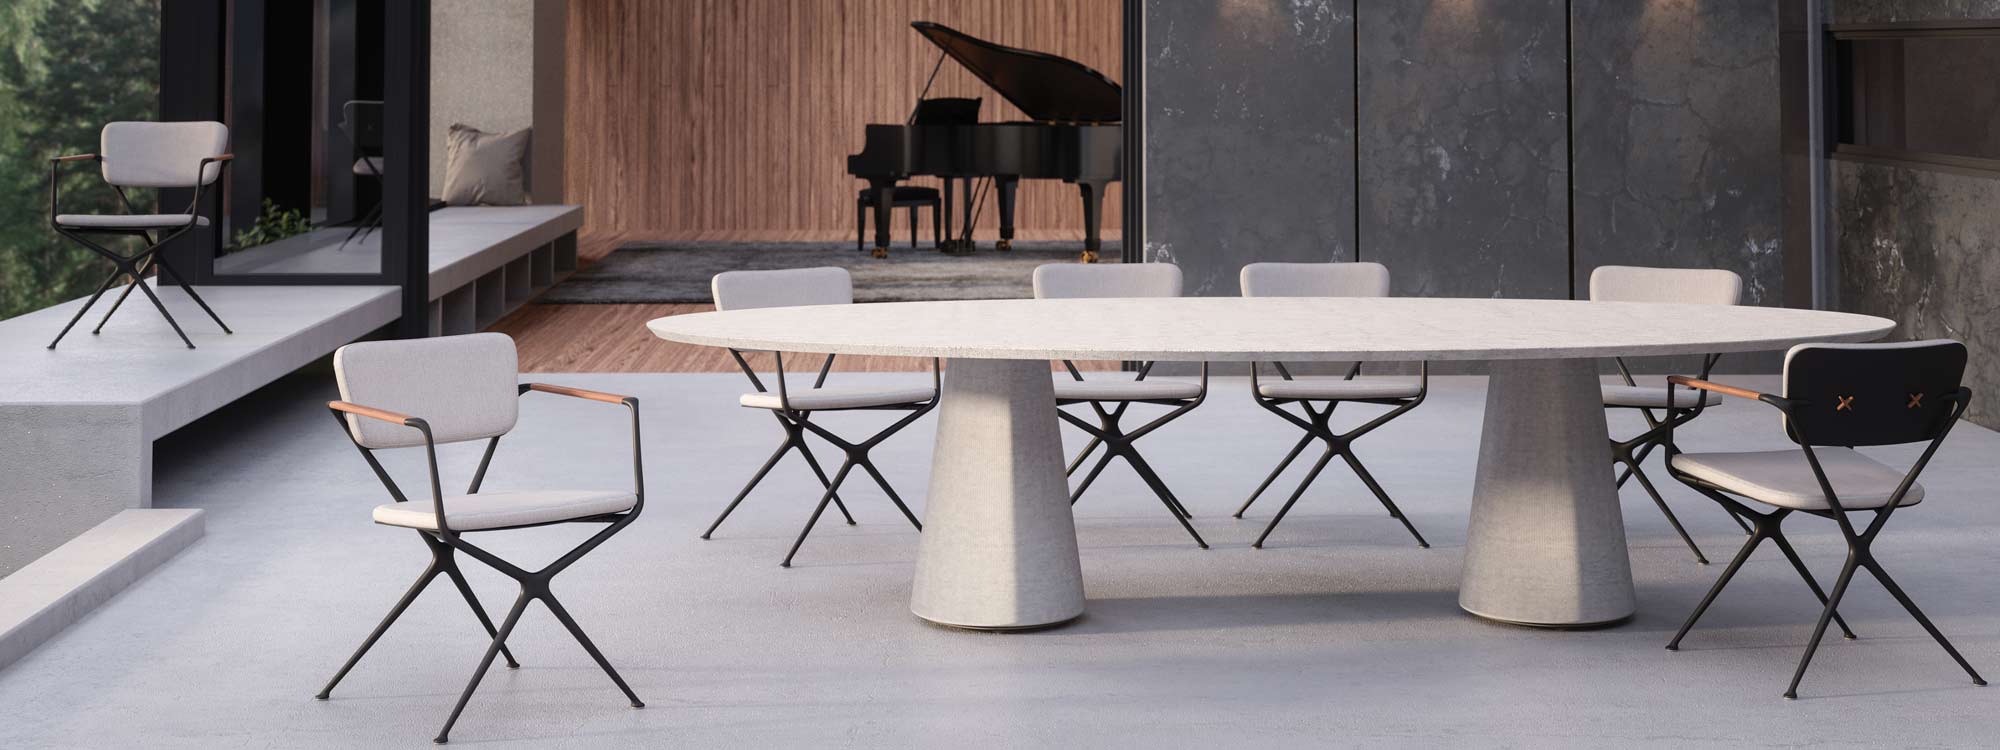 Image of Conix oval concrete table and Exes chairs by Royal Botania with grand piano in background